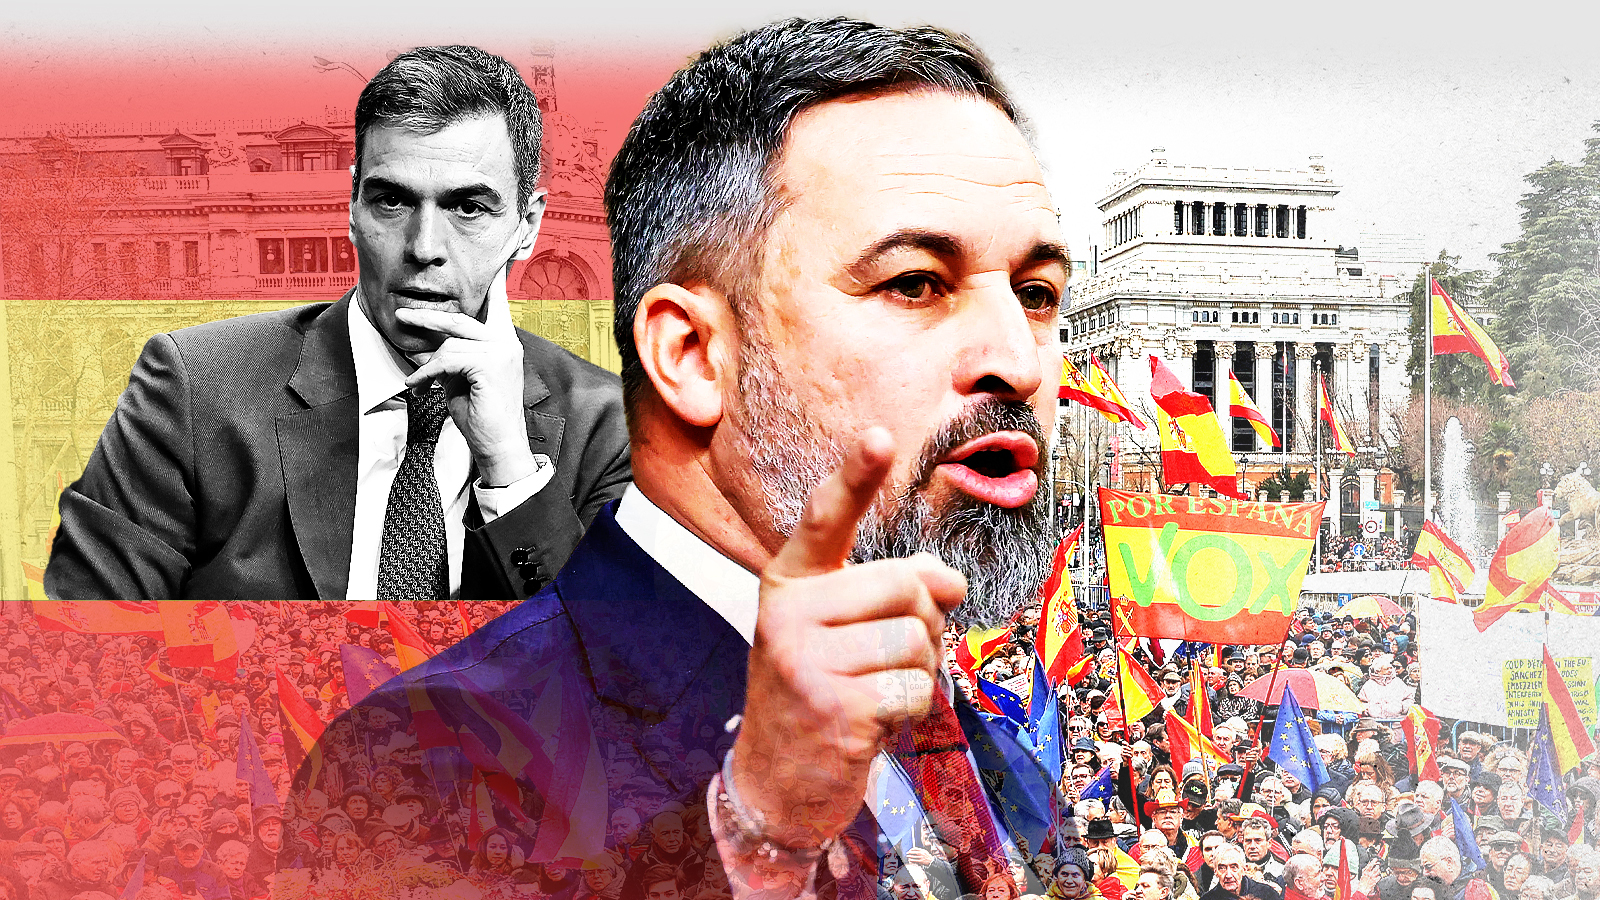 Santiago Abascal, leader of the populist Vox party, is a greater threat than separatists to Pedro Sánchez’s government, an ally of the prime minister has said